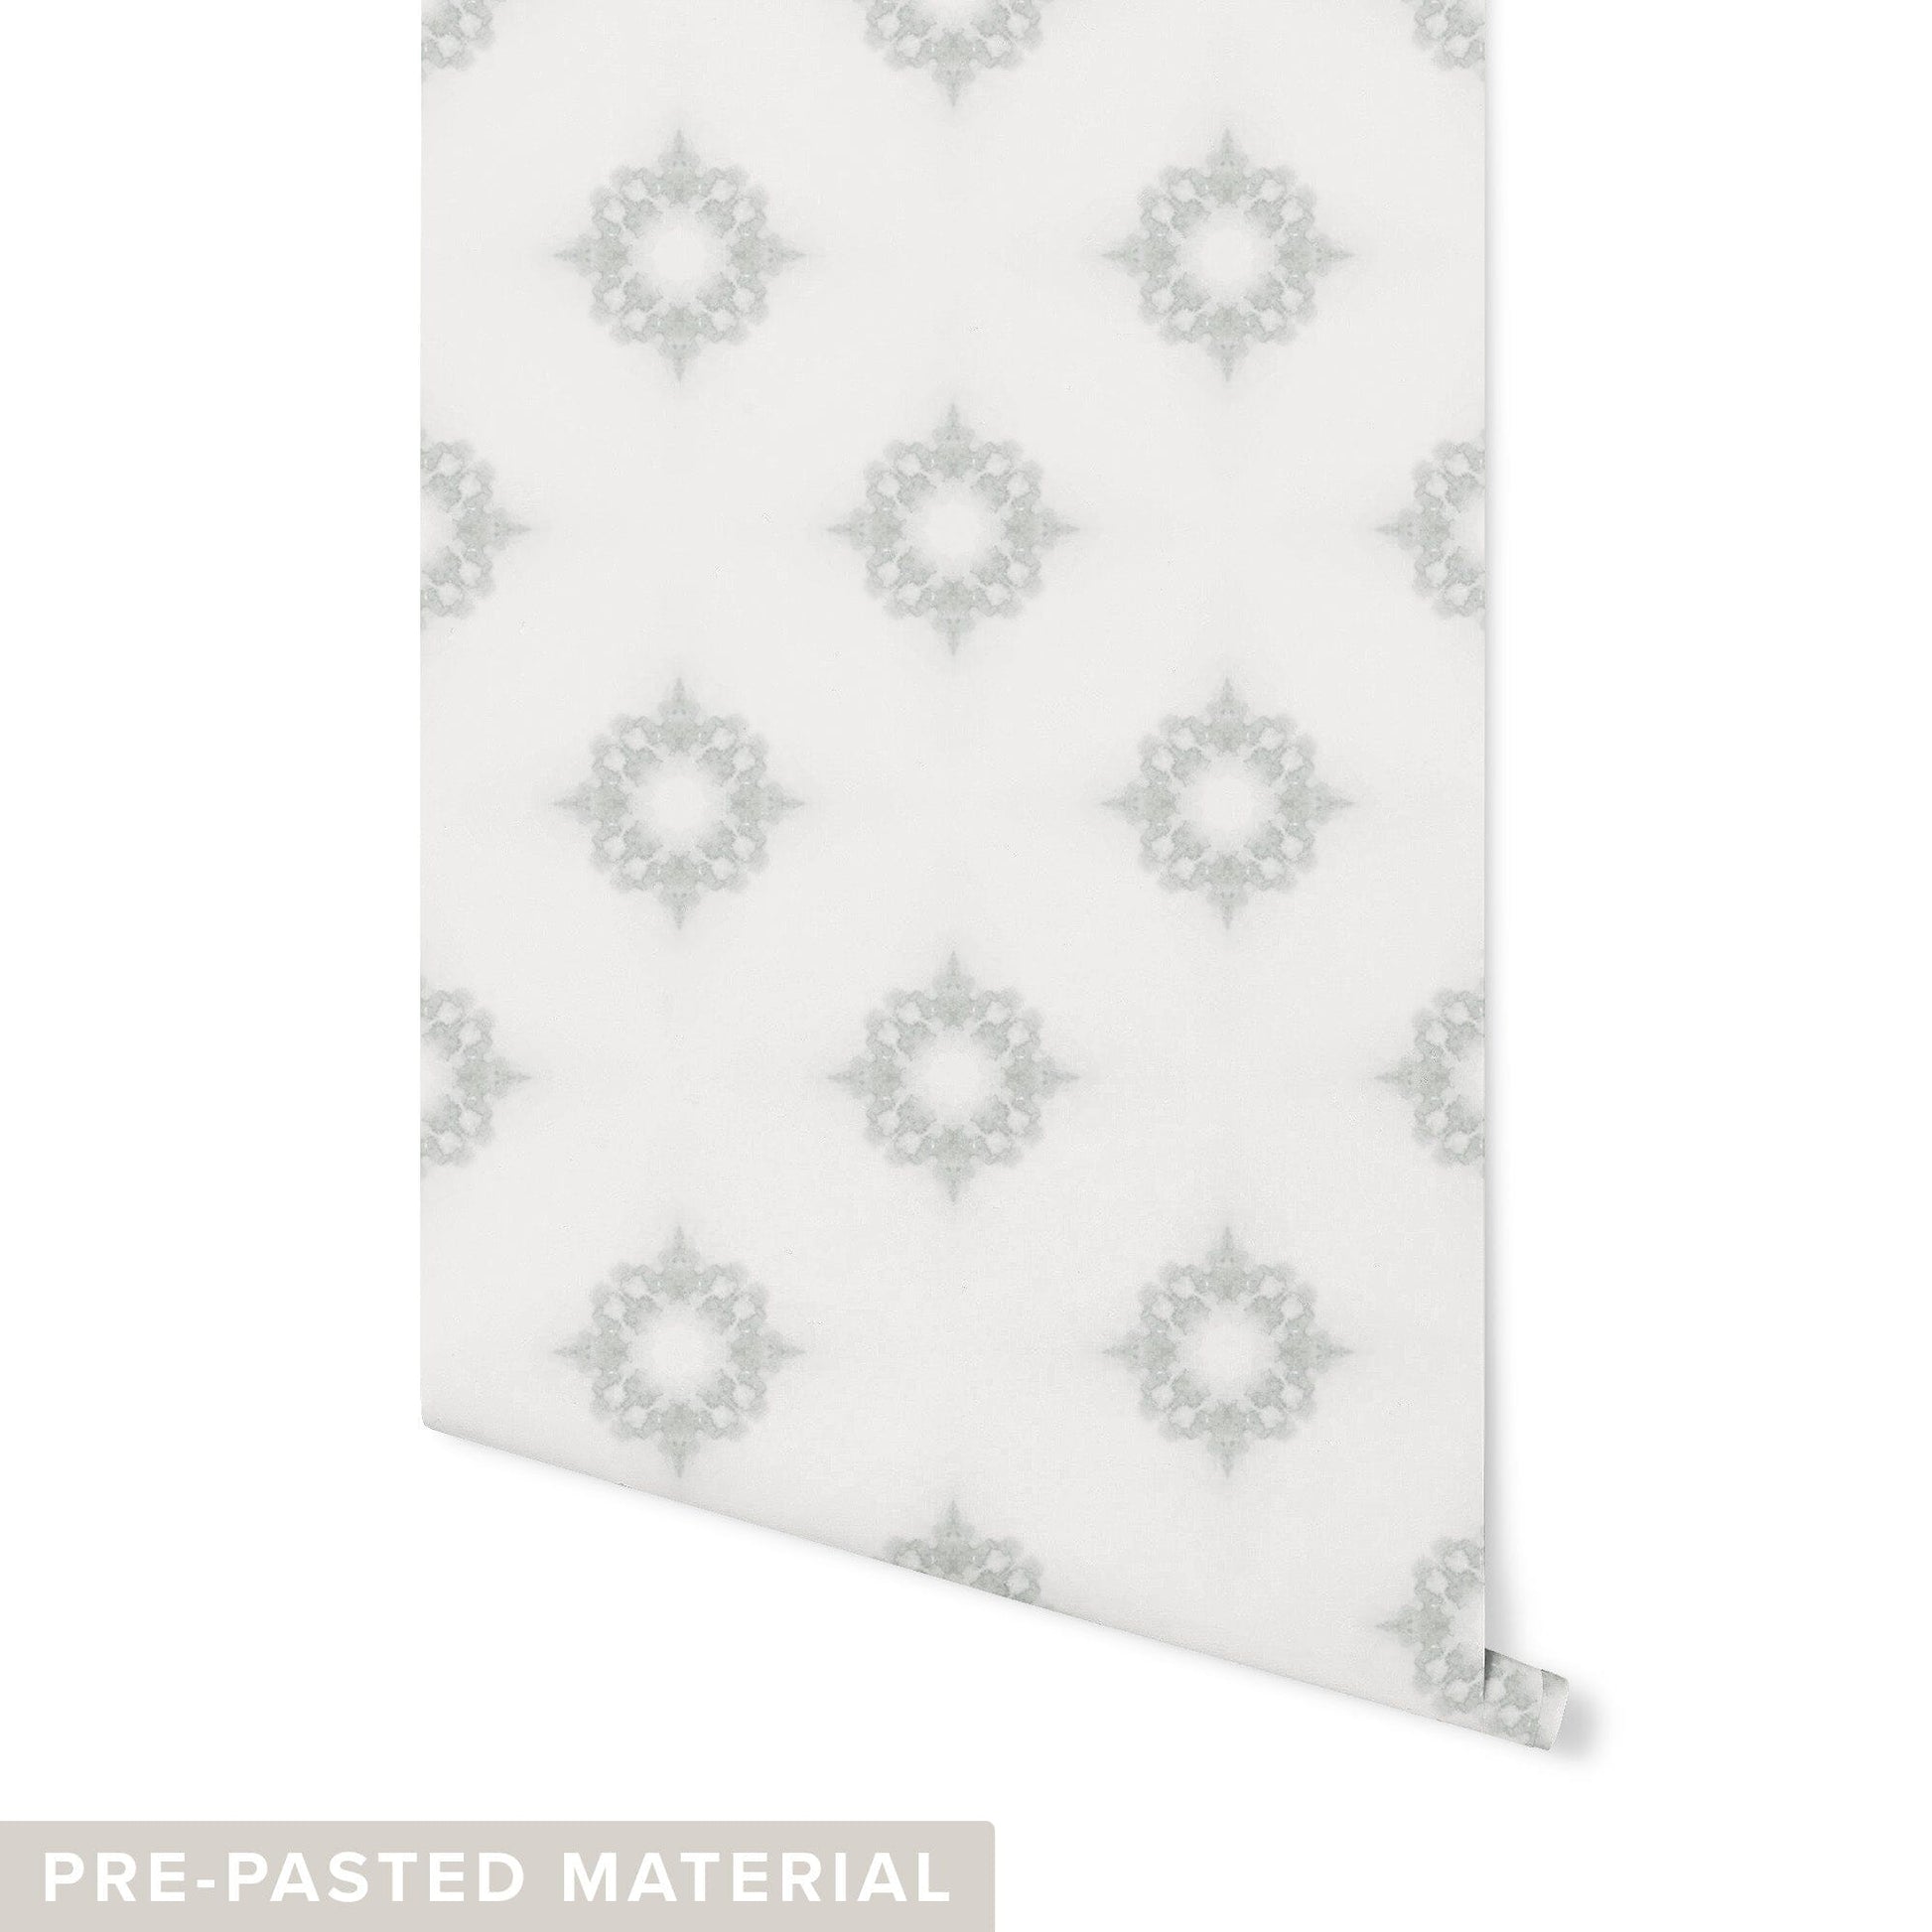 Etoile Wallpaper Wallpaper Urbanwalls Pre-pasted Sand DOUBLE ROLL : 46" X 4 FEET